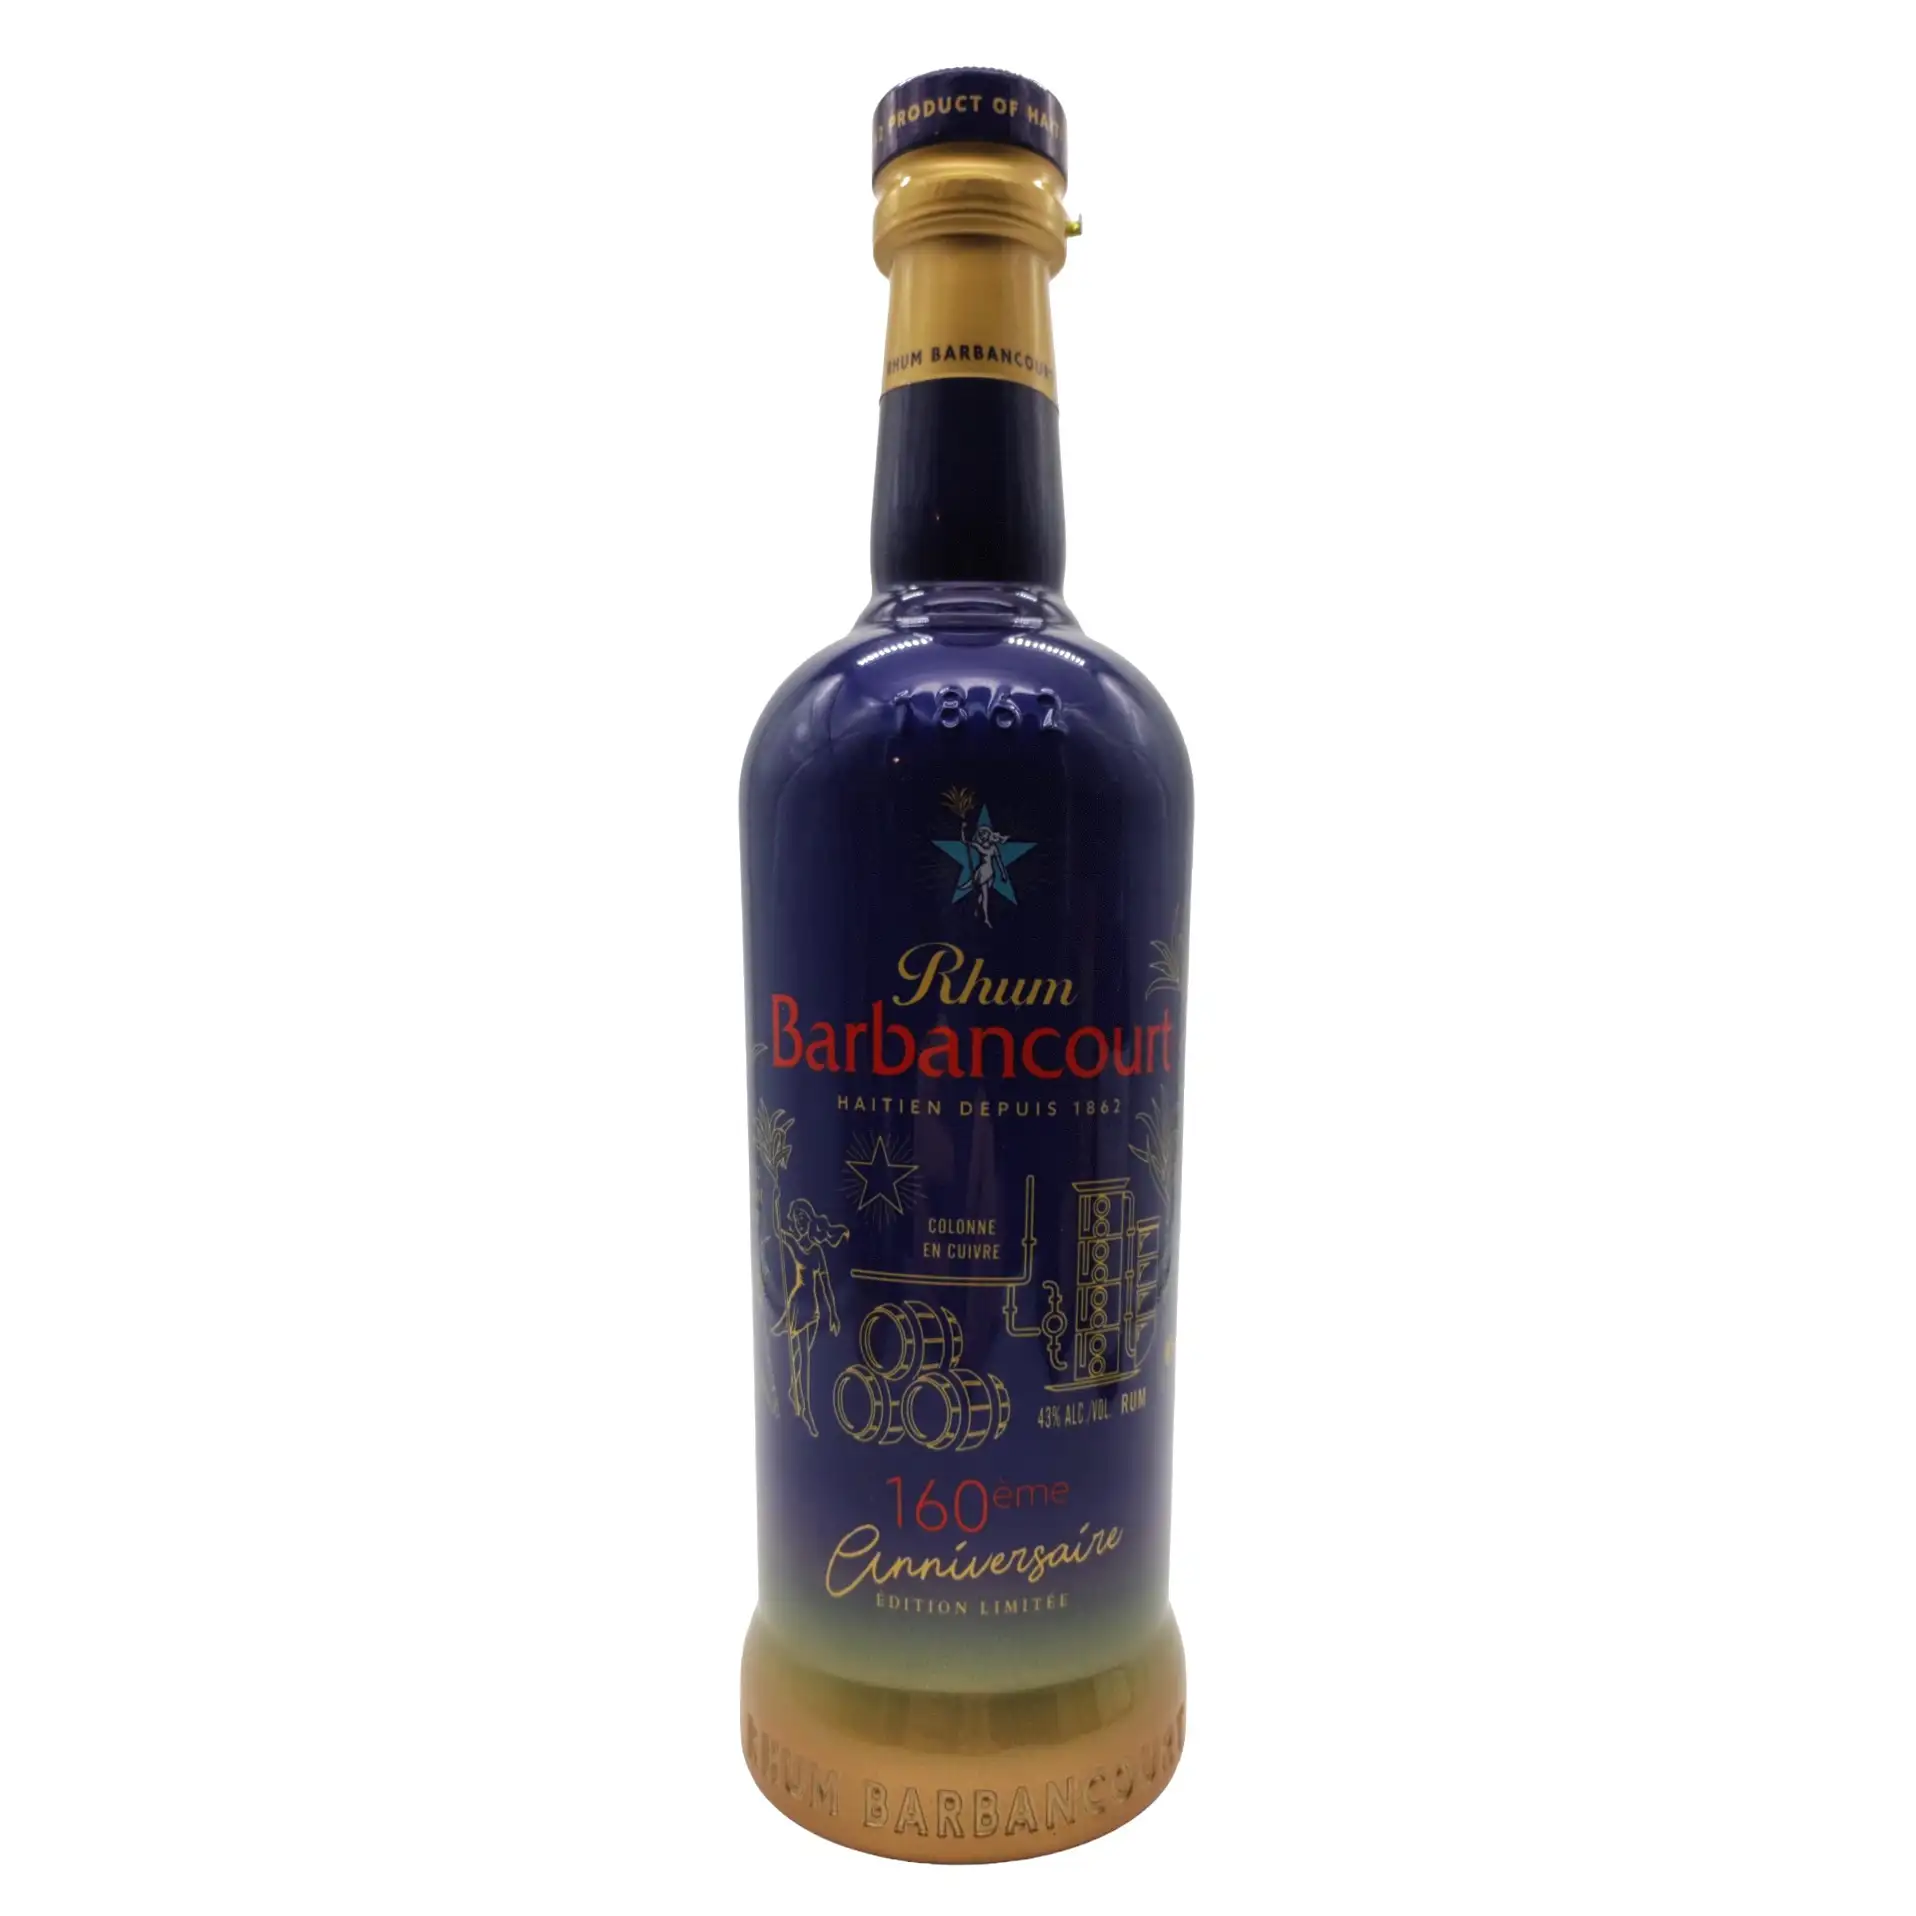 Image of the front of the bottle of the rum Cuvée 160ème anniversaire